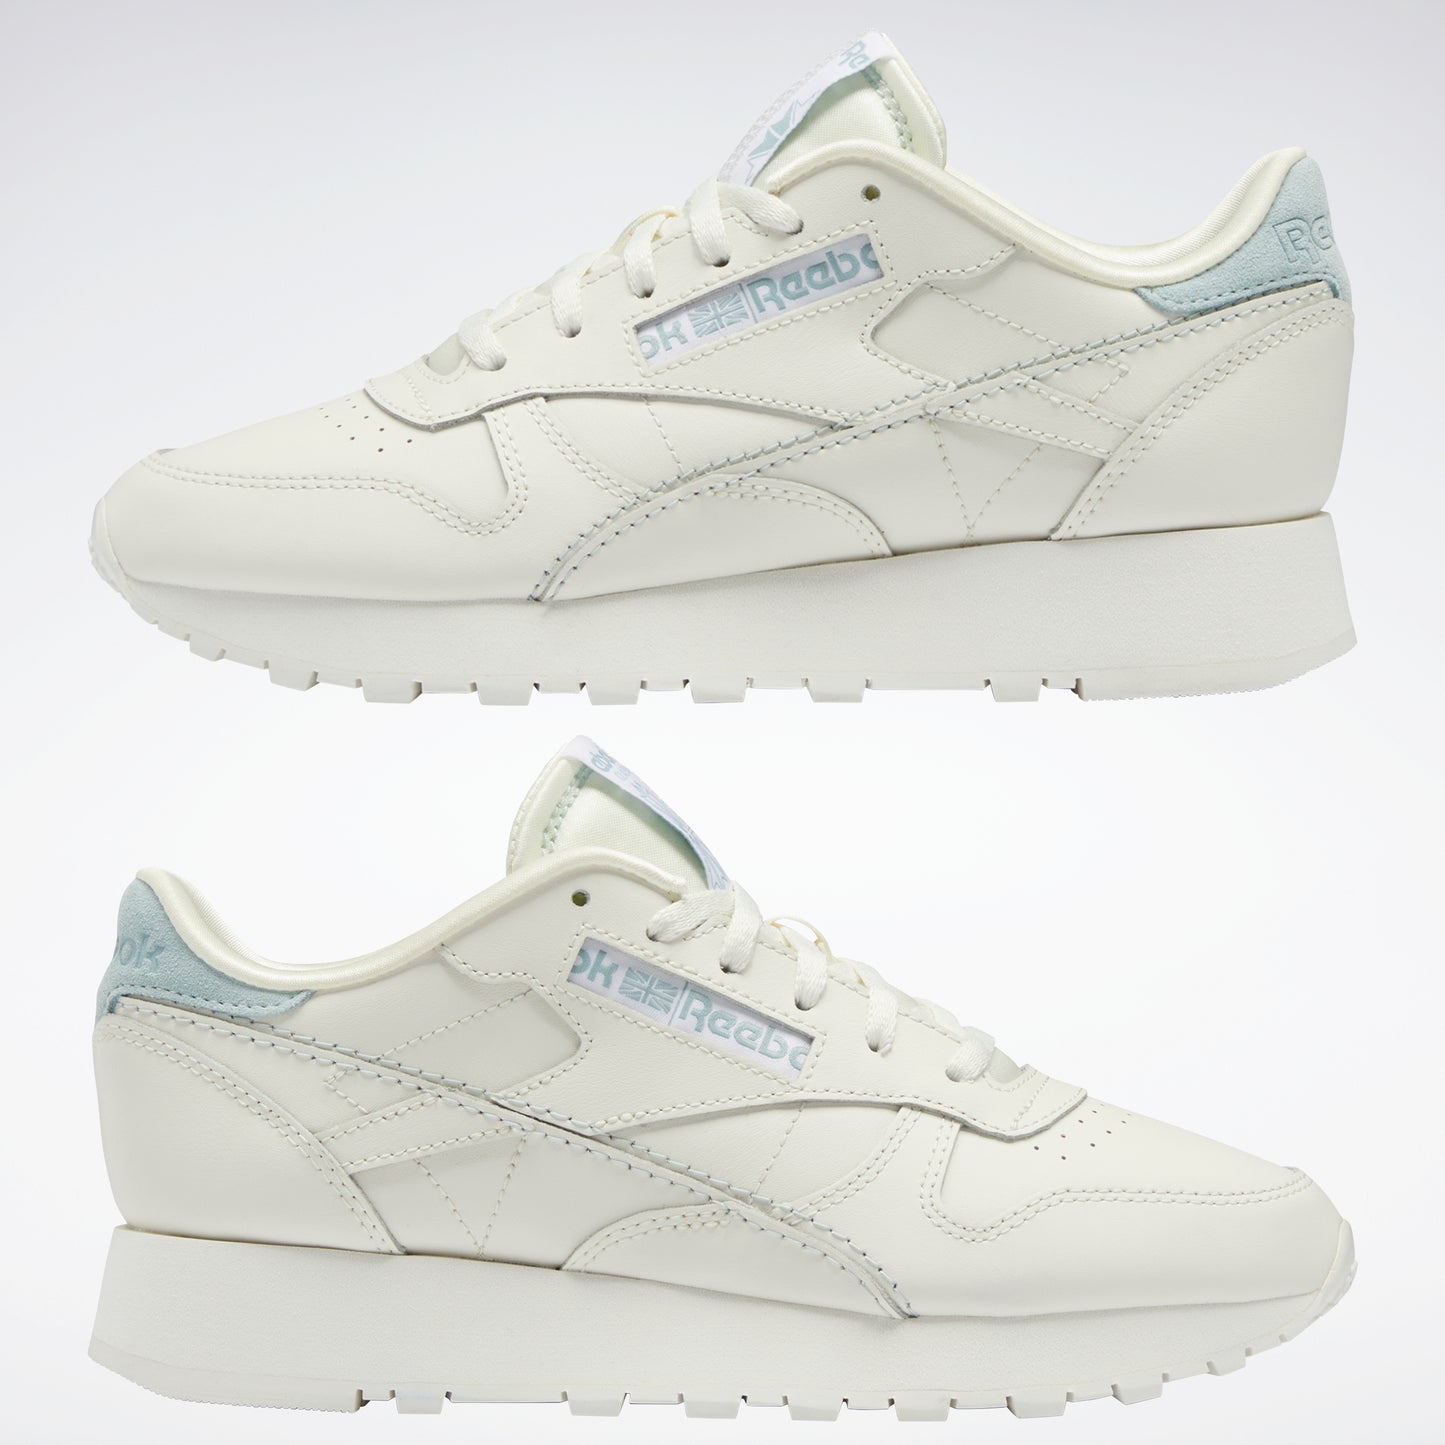 Reebok Footwear Women Classic Leather Make It Yours Shoes Chalk/Chalk/Seagry